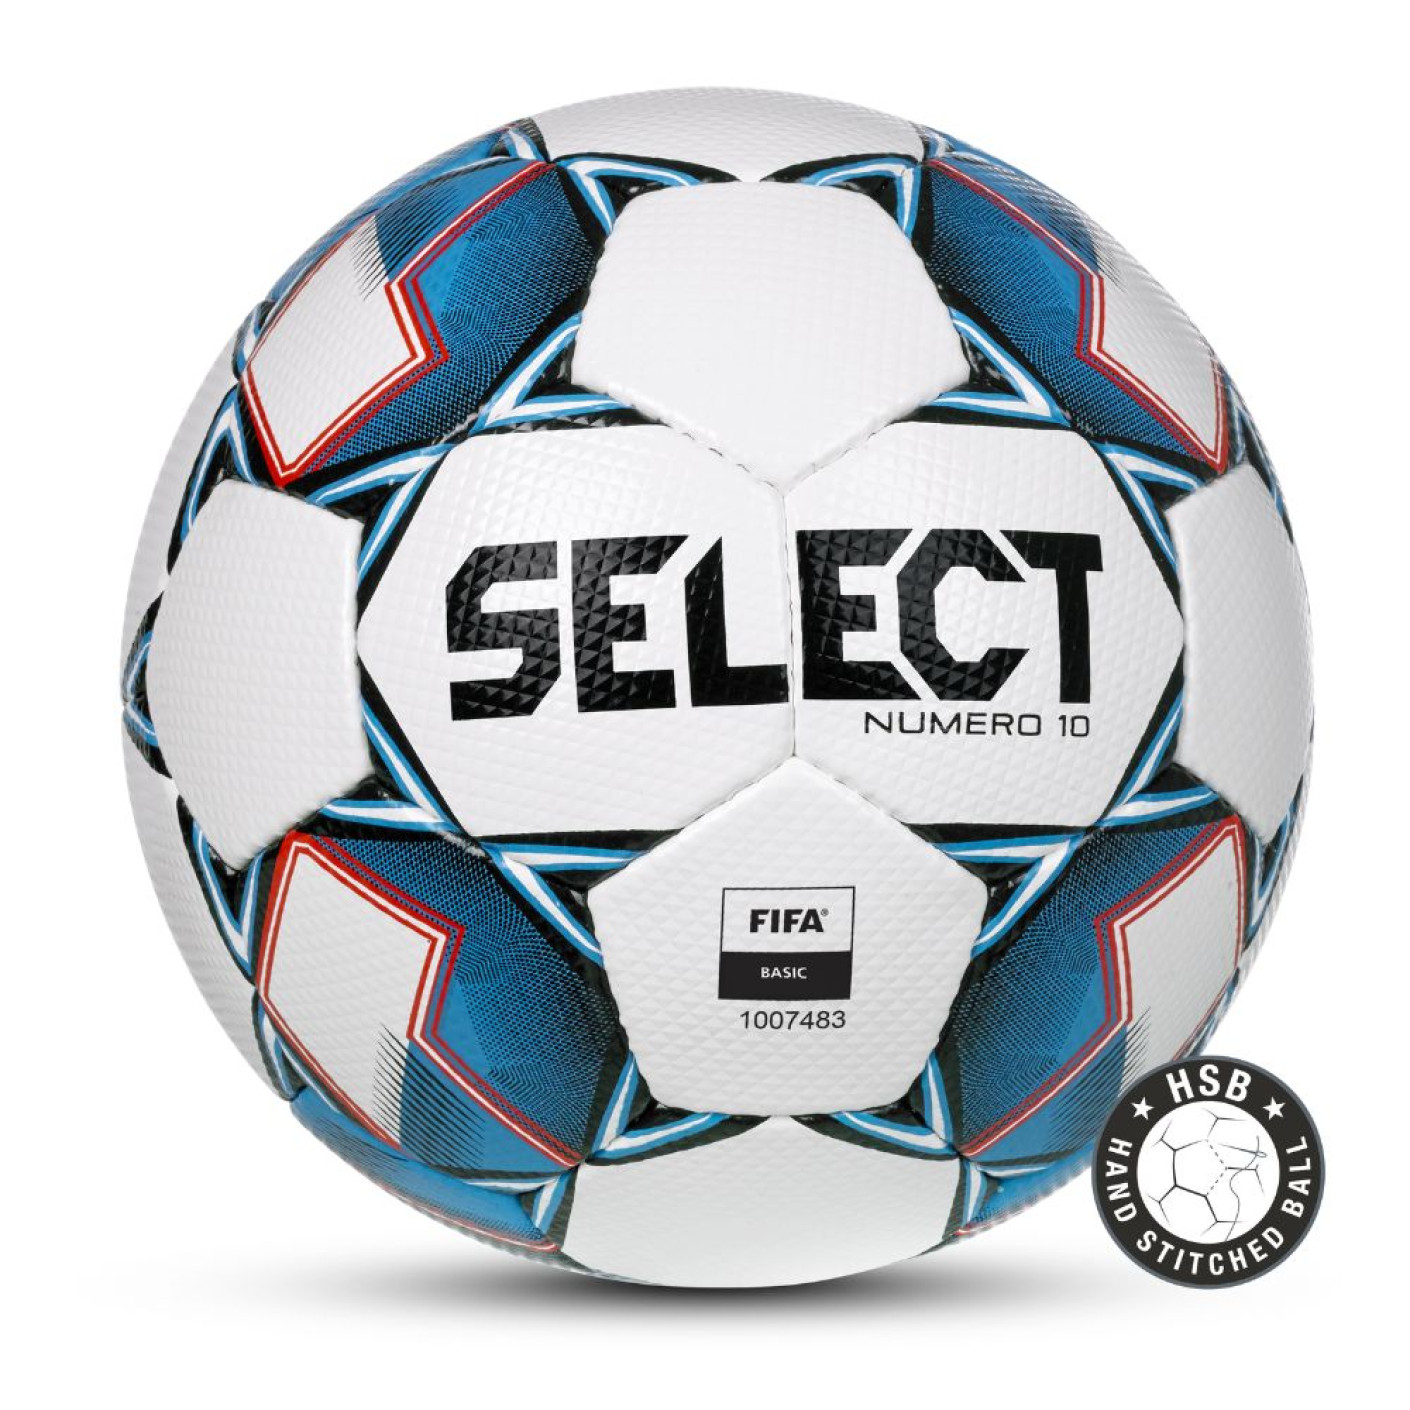 Select Numero 10 v22 Voetbal Maat 5 Wit Blauw